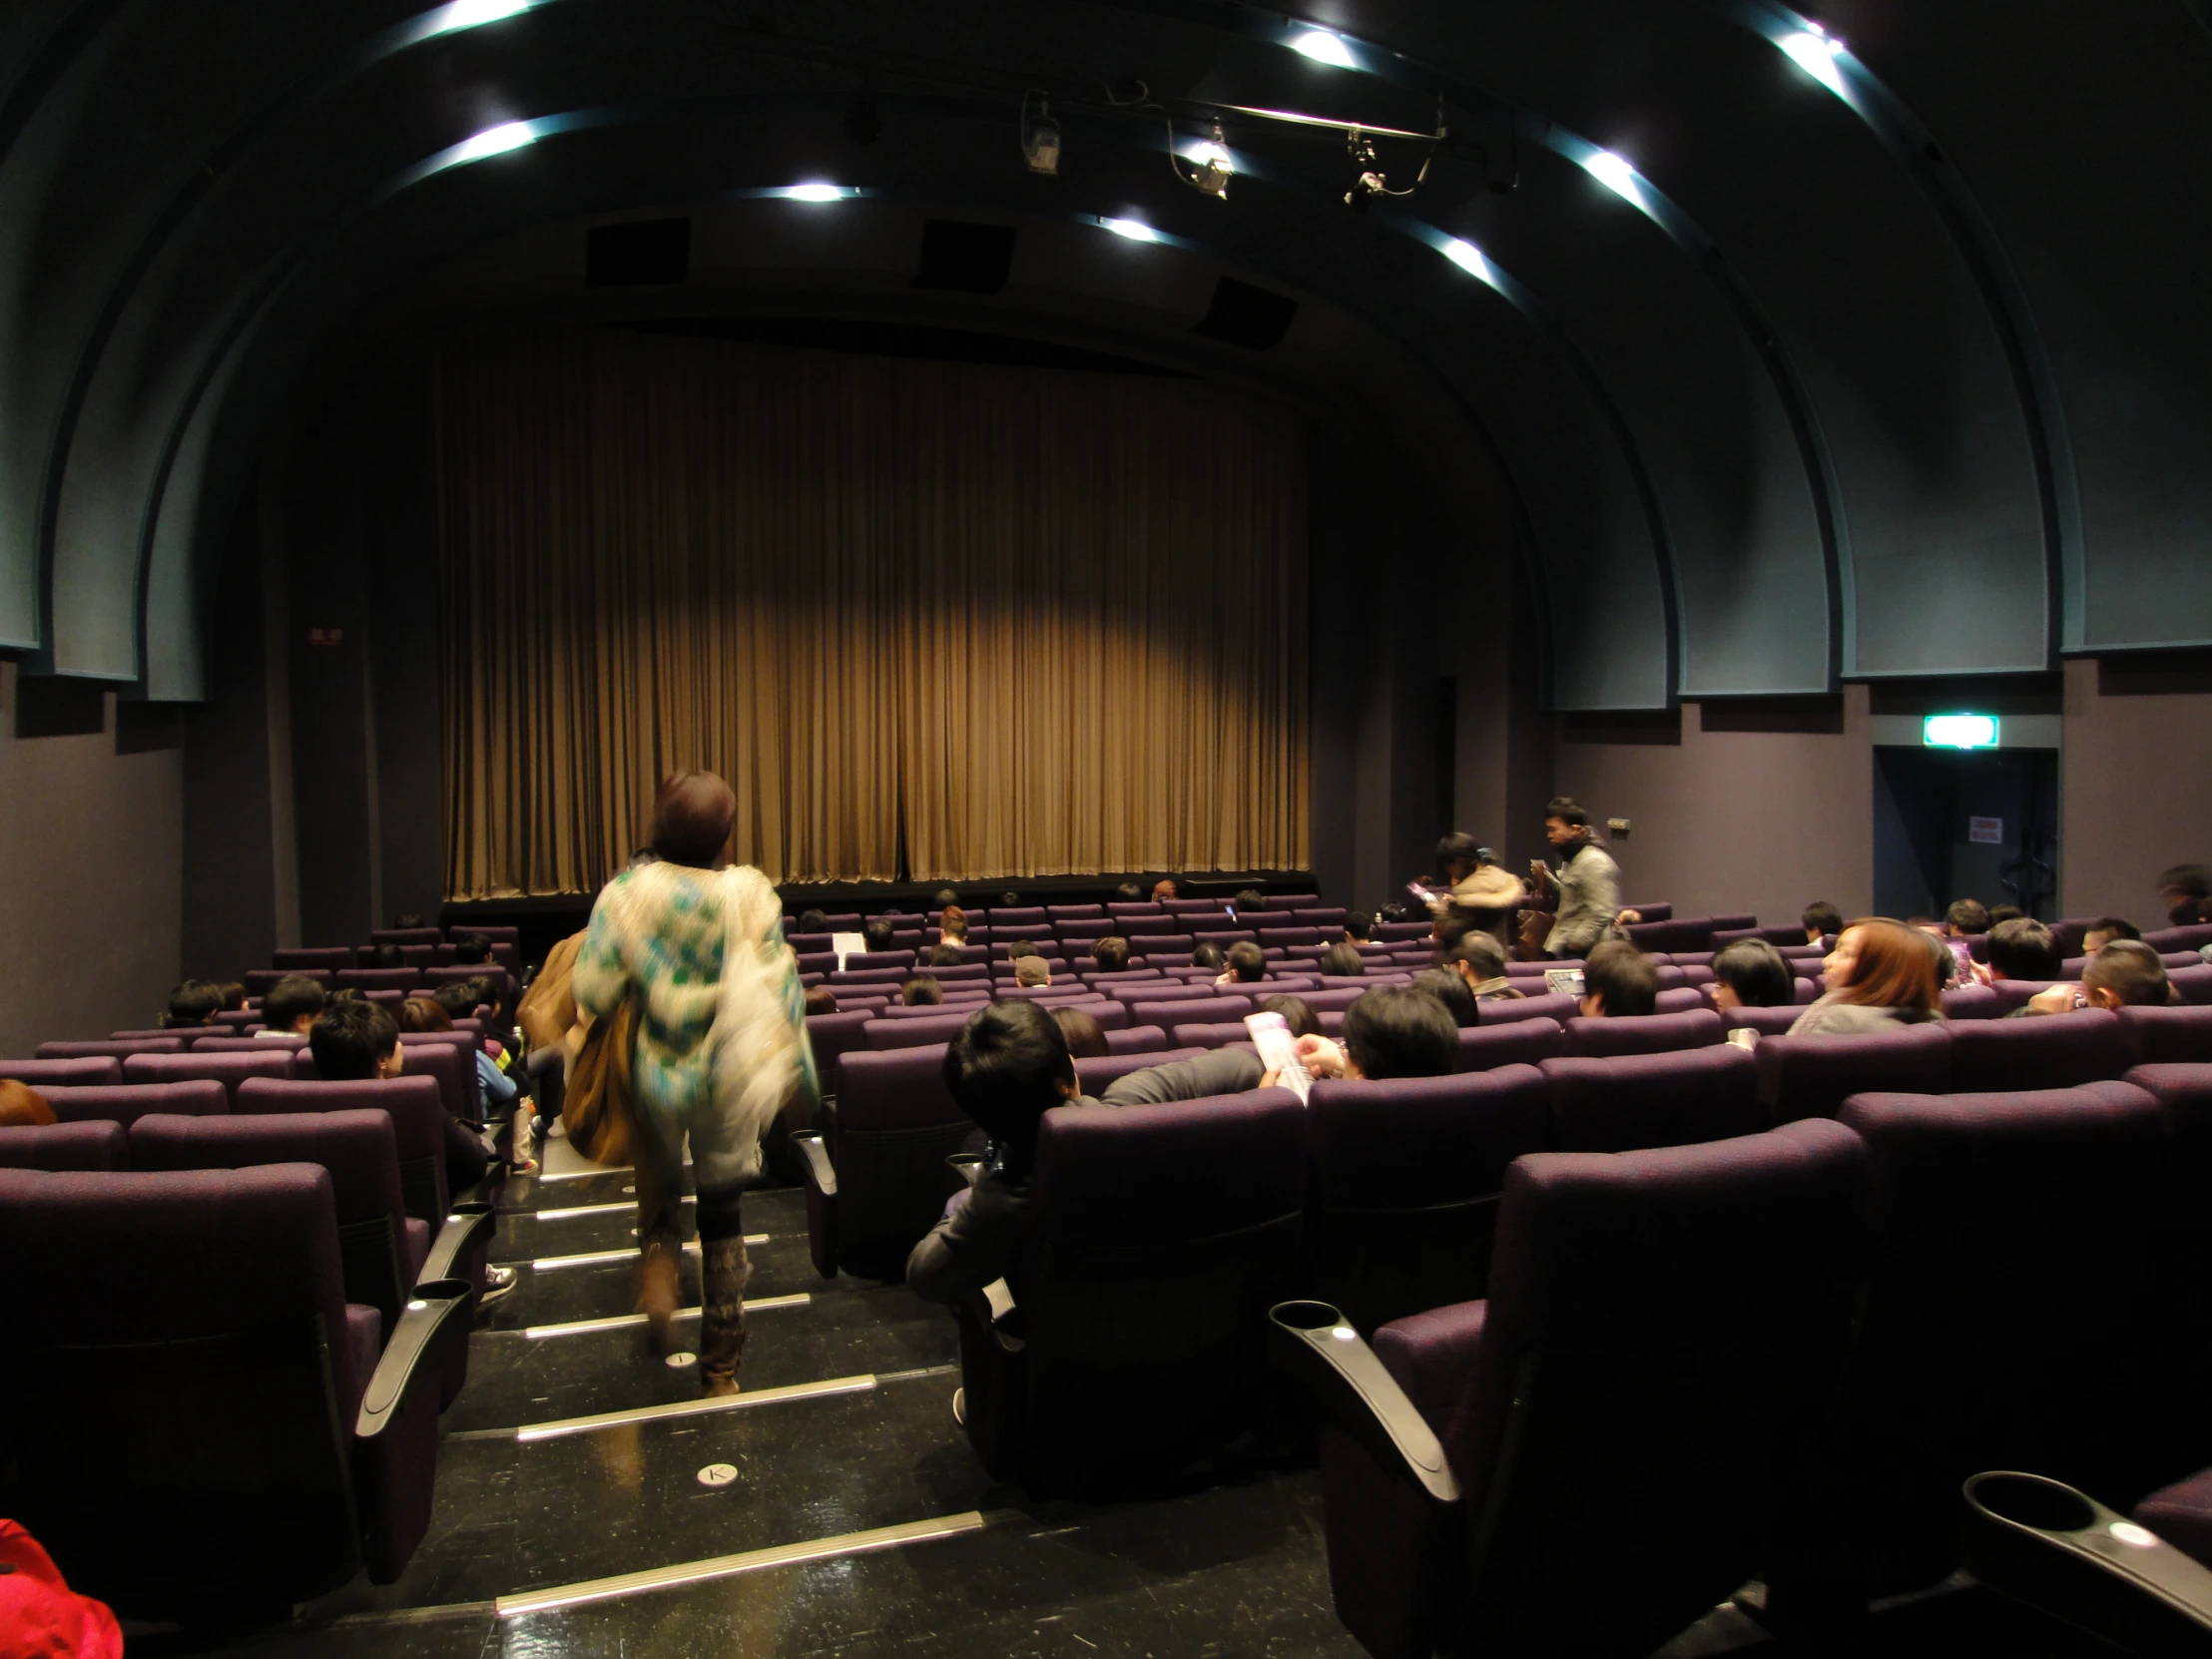 people in chairs and a man walking towards the auditorium stage